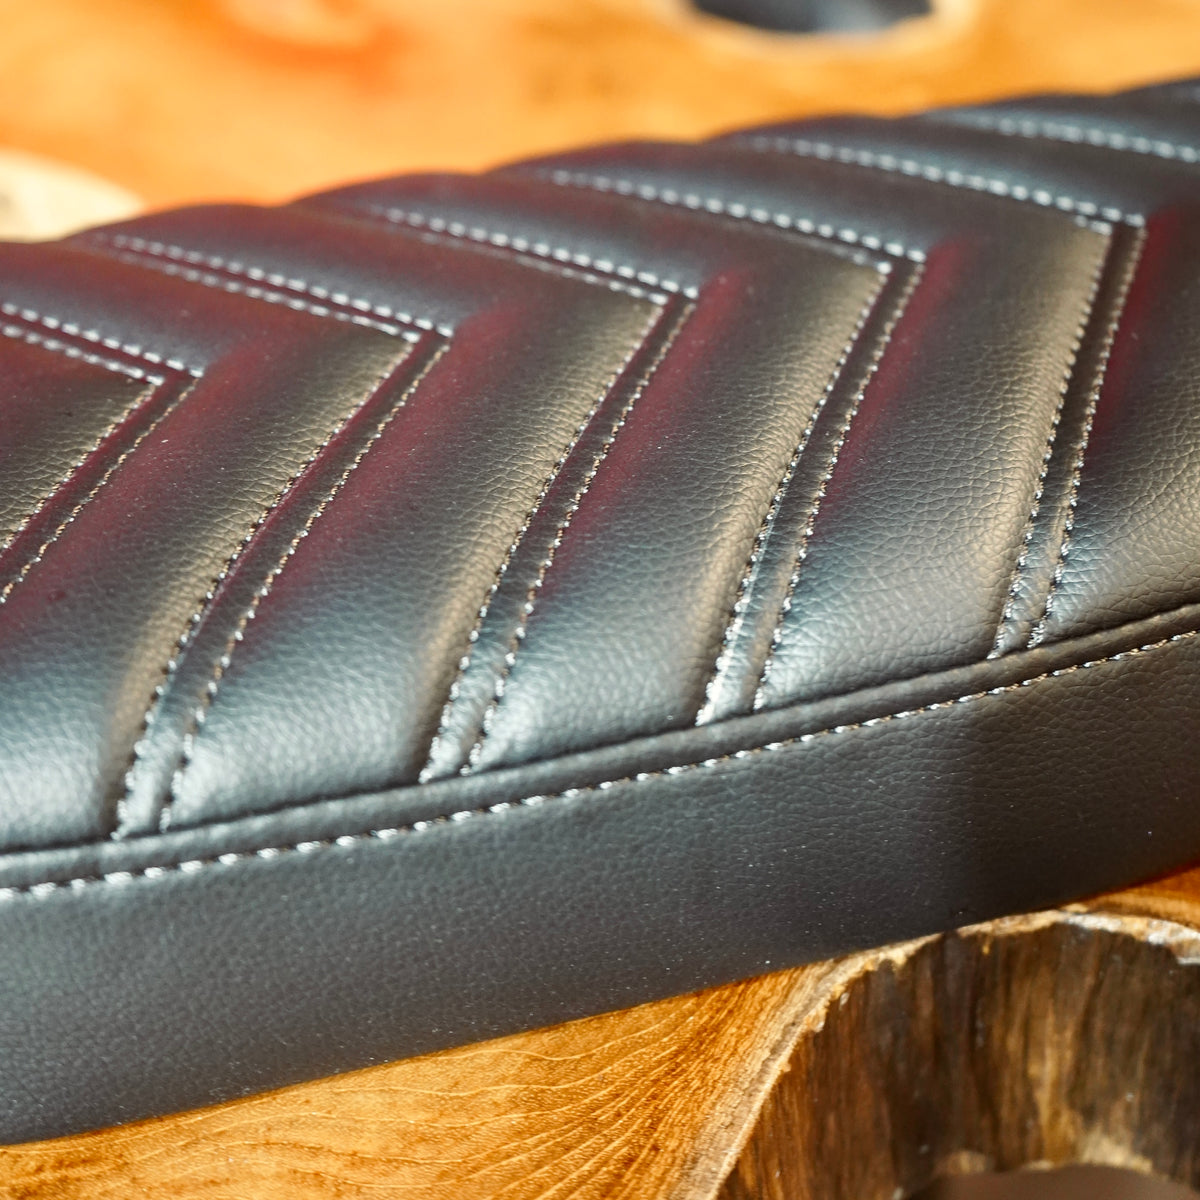 Close up of the stitching pattern on the synthetic leather seat.